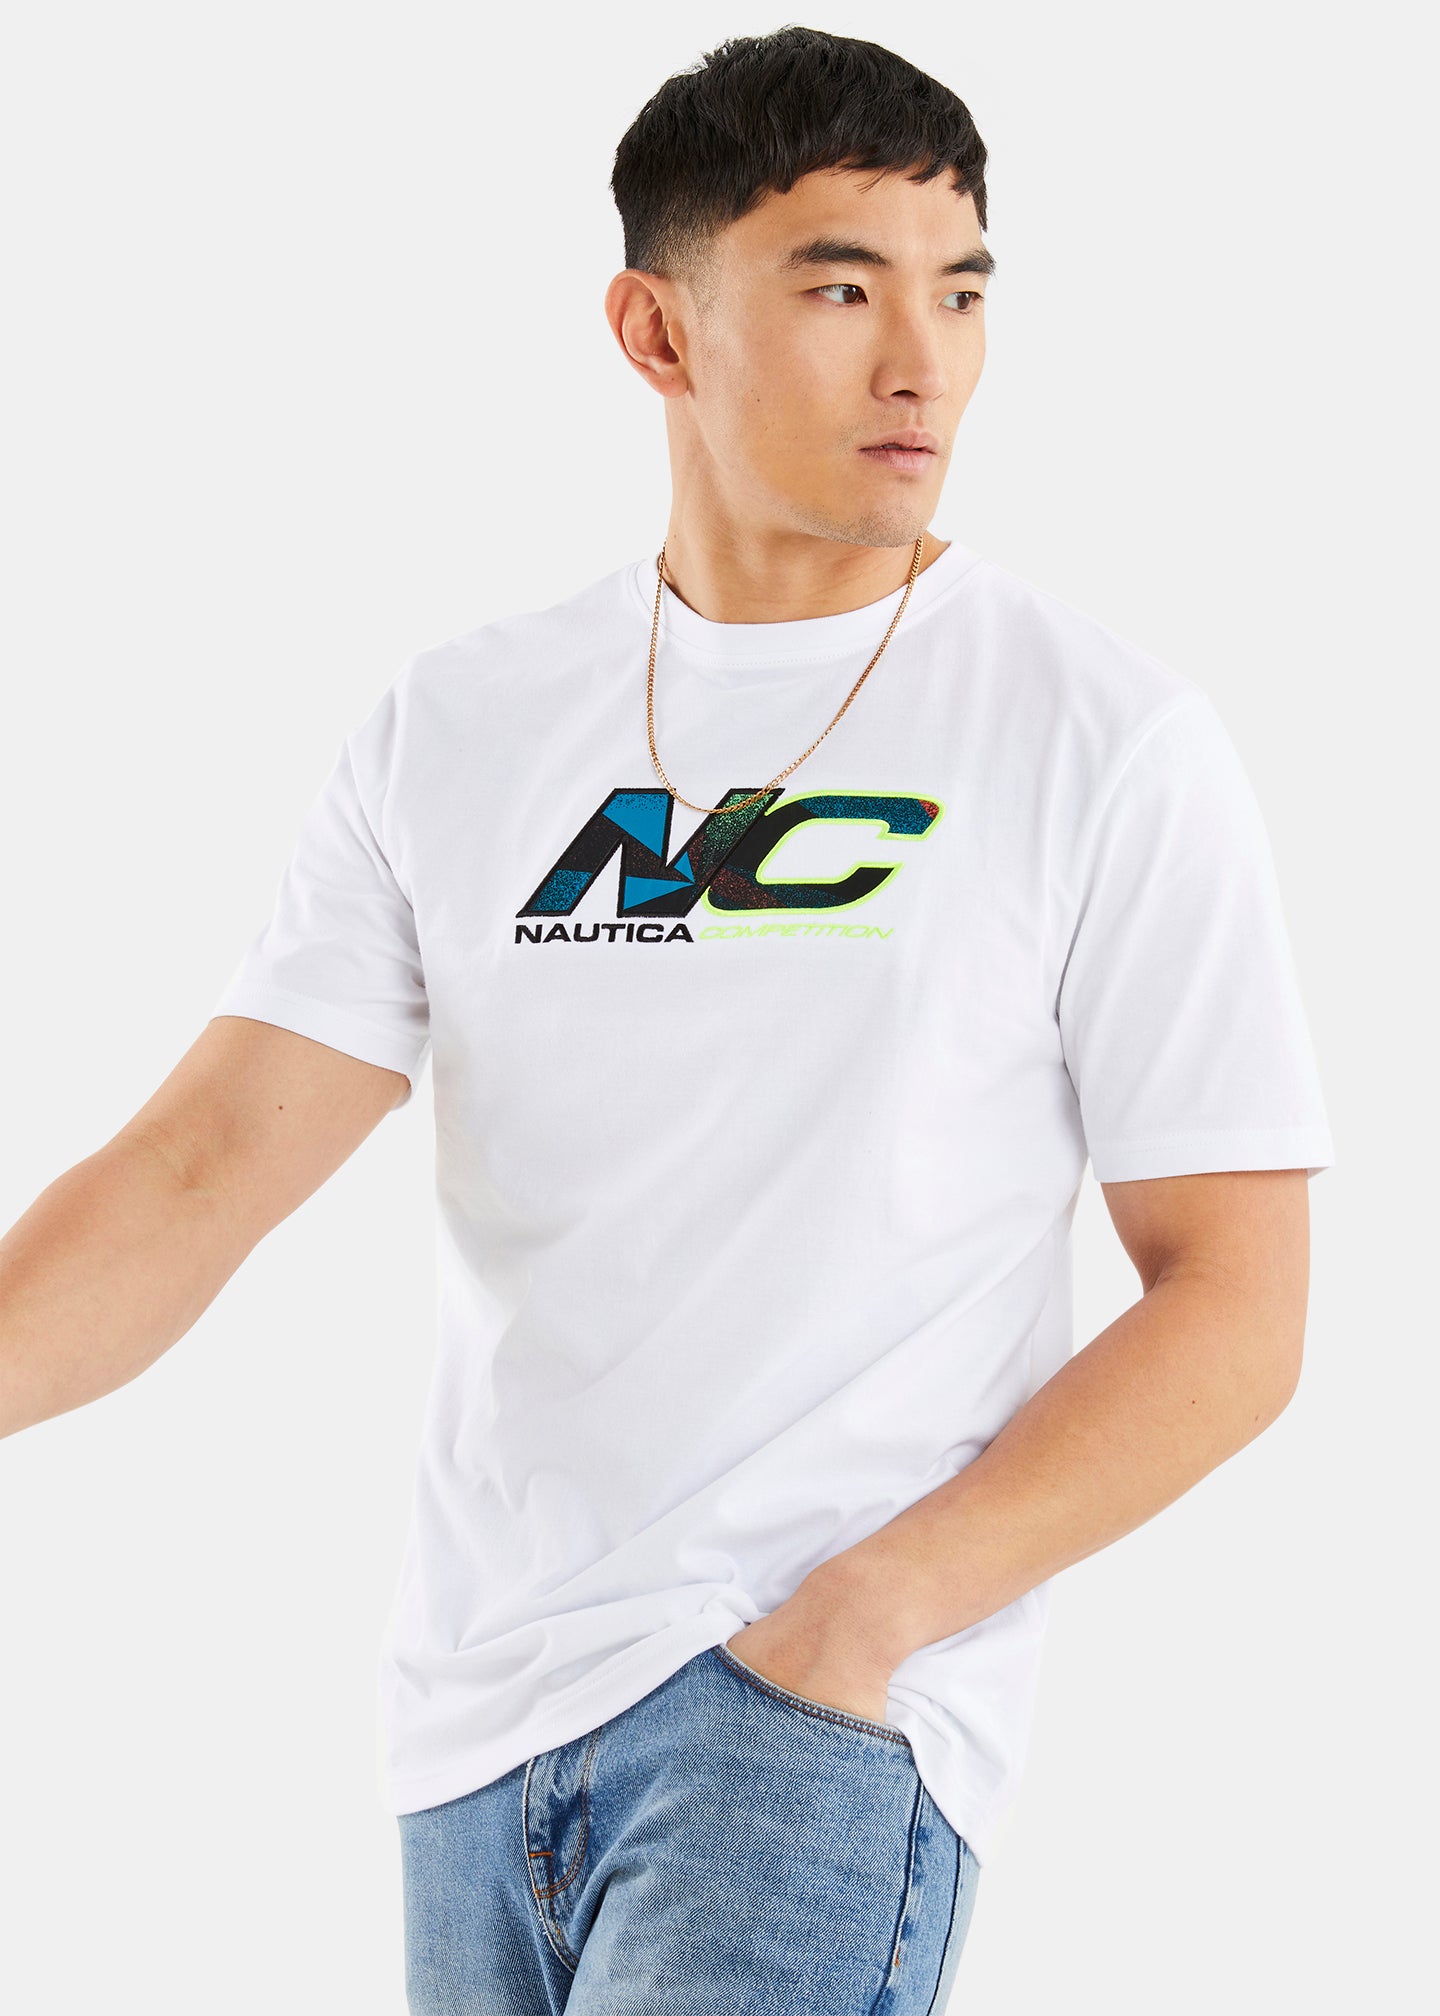 Nautica Competition Fogo T-Shirt - White - Front